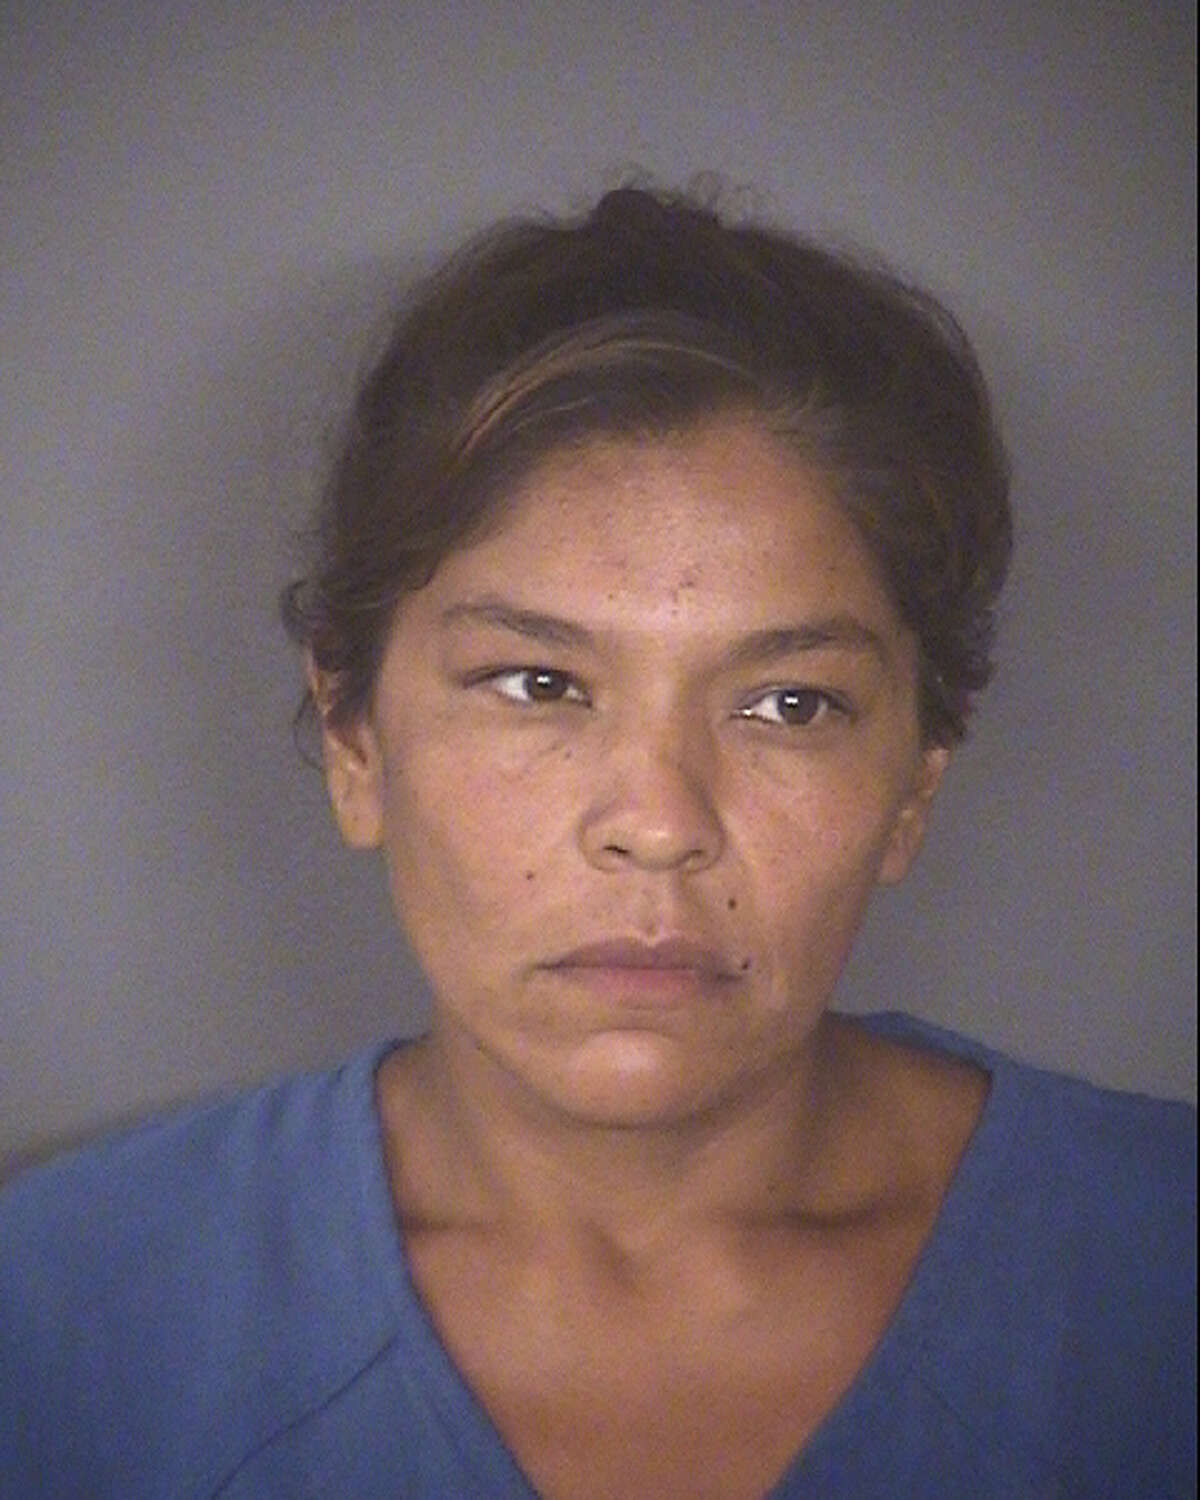 Laura Garcia faces charges of aggravated kidnapping and trafficking of persons. She remains in the Bexar County Jail.